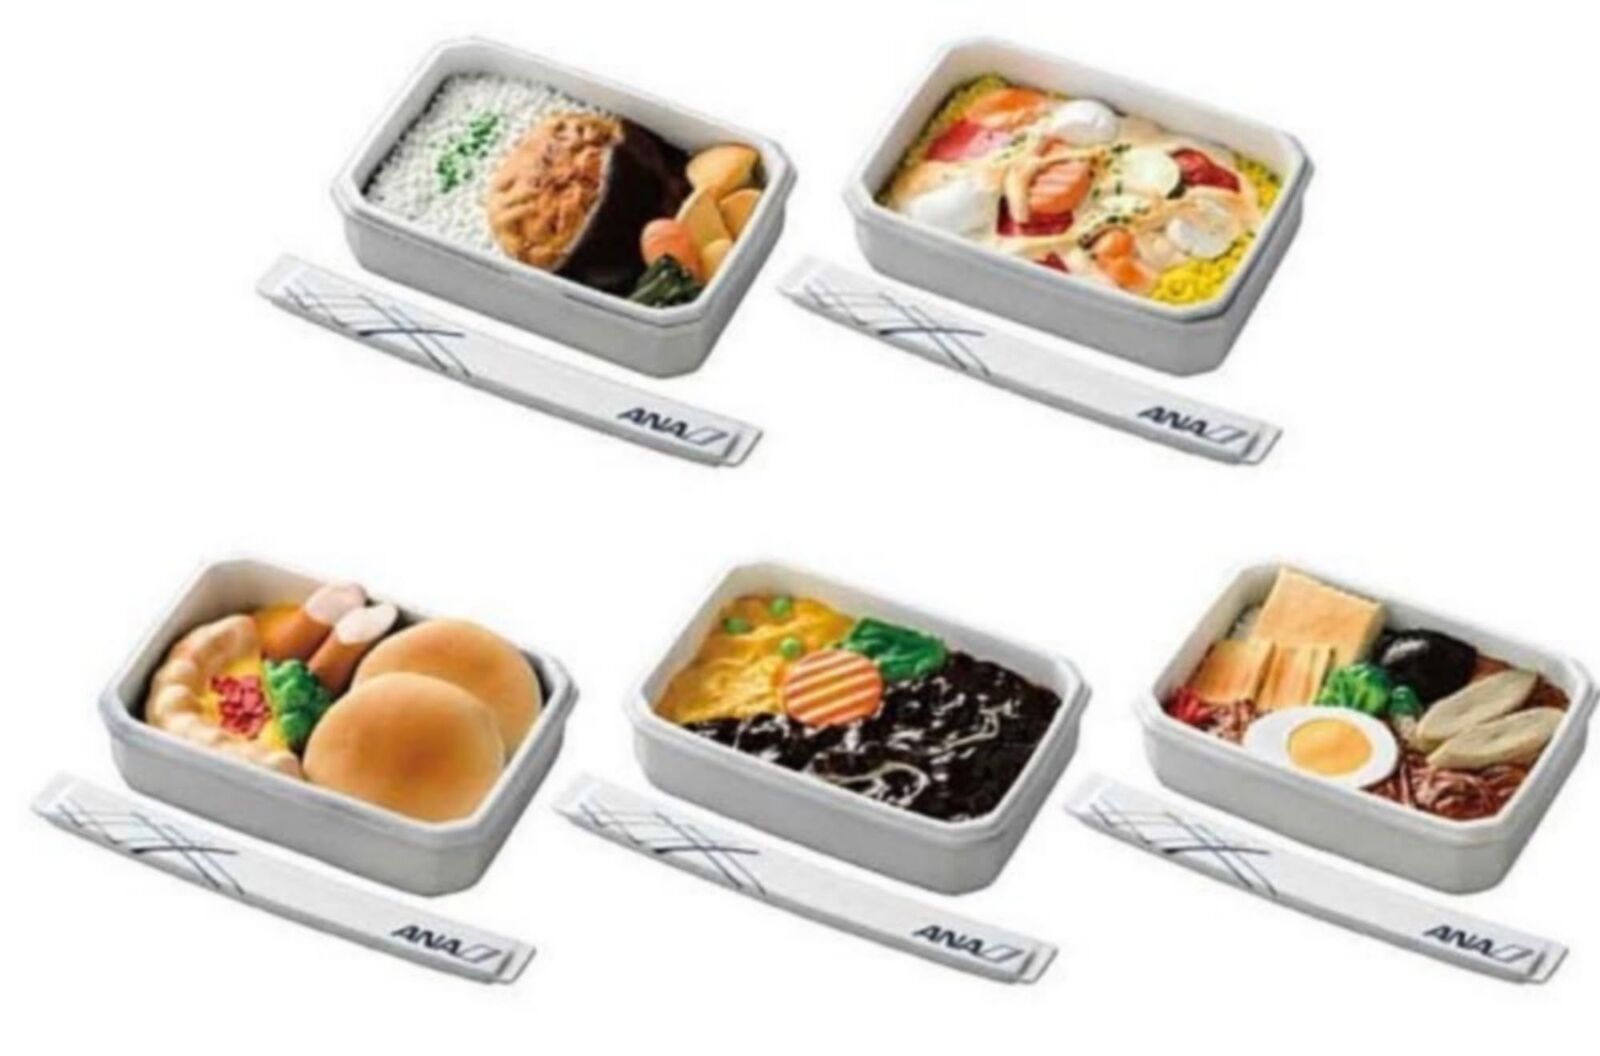 (Capsule toy) TAMA-KYU ANA Economy Class airline meal Figure 1 [all 5 sets]